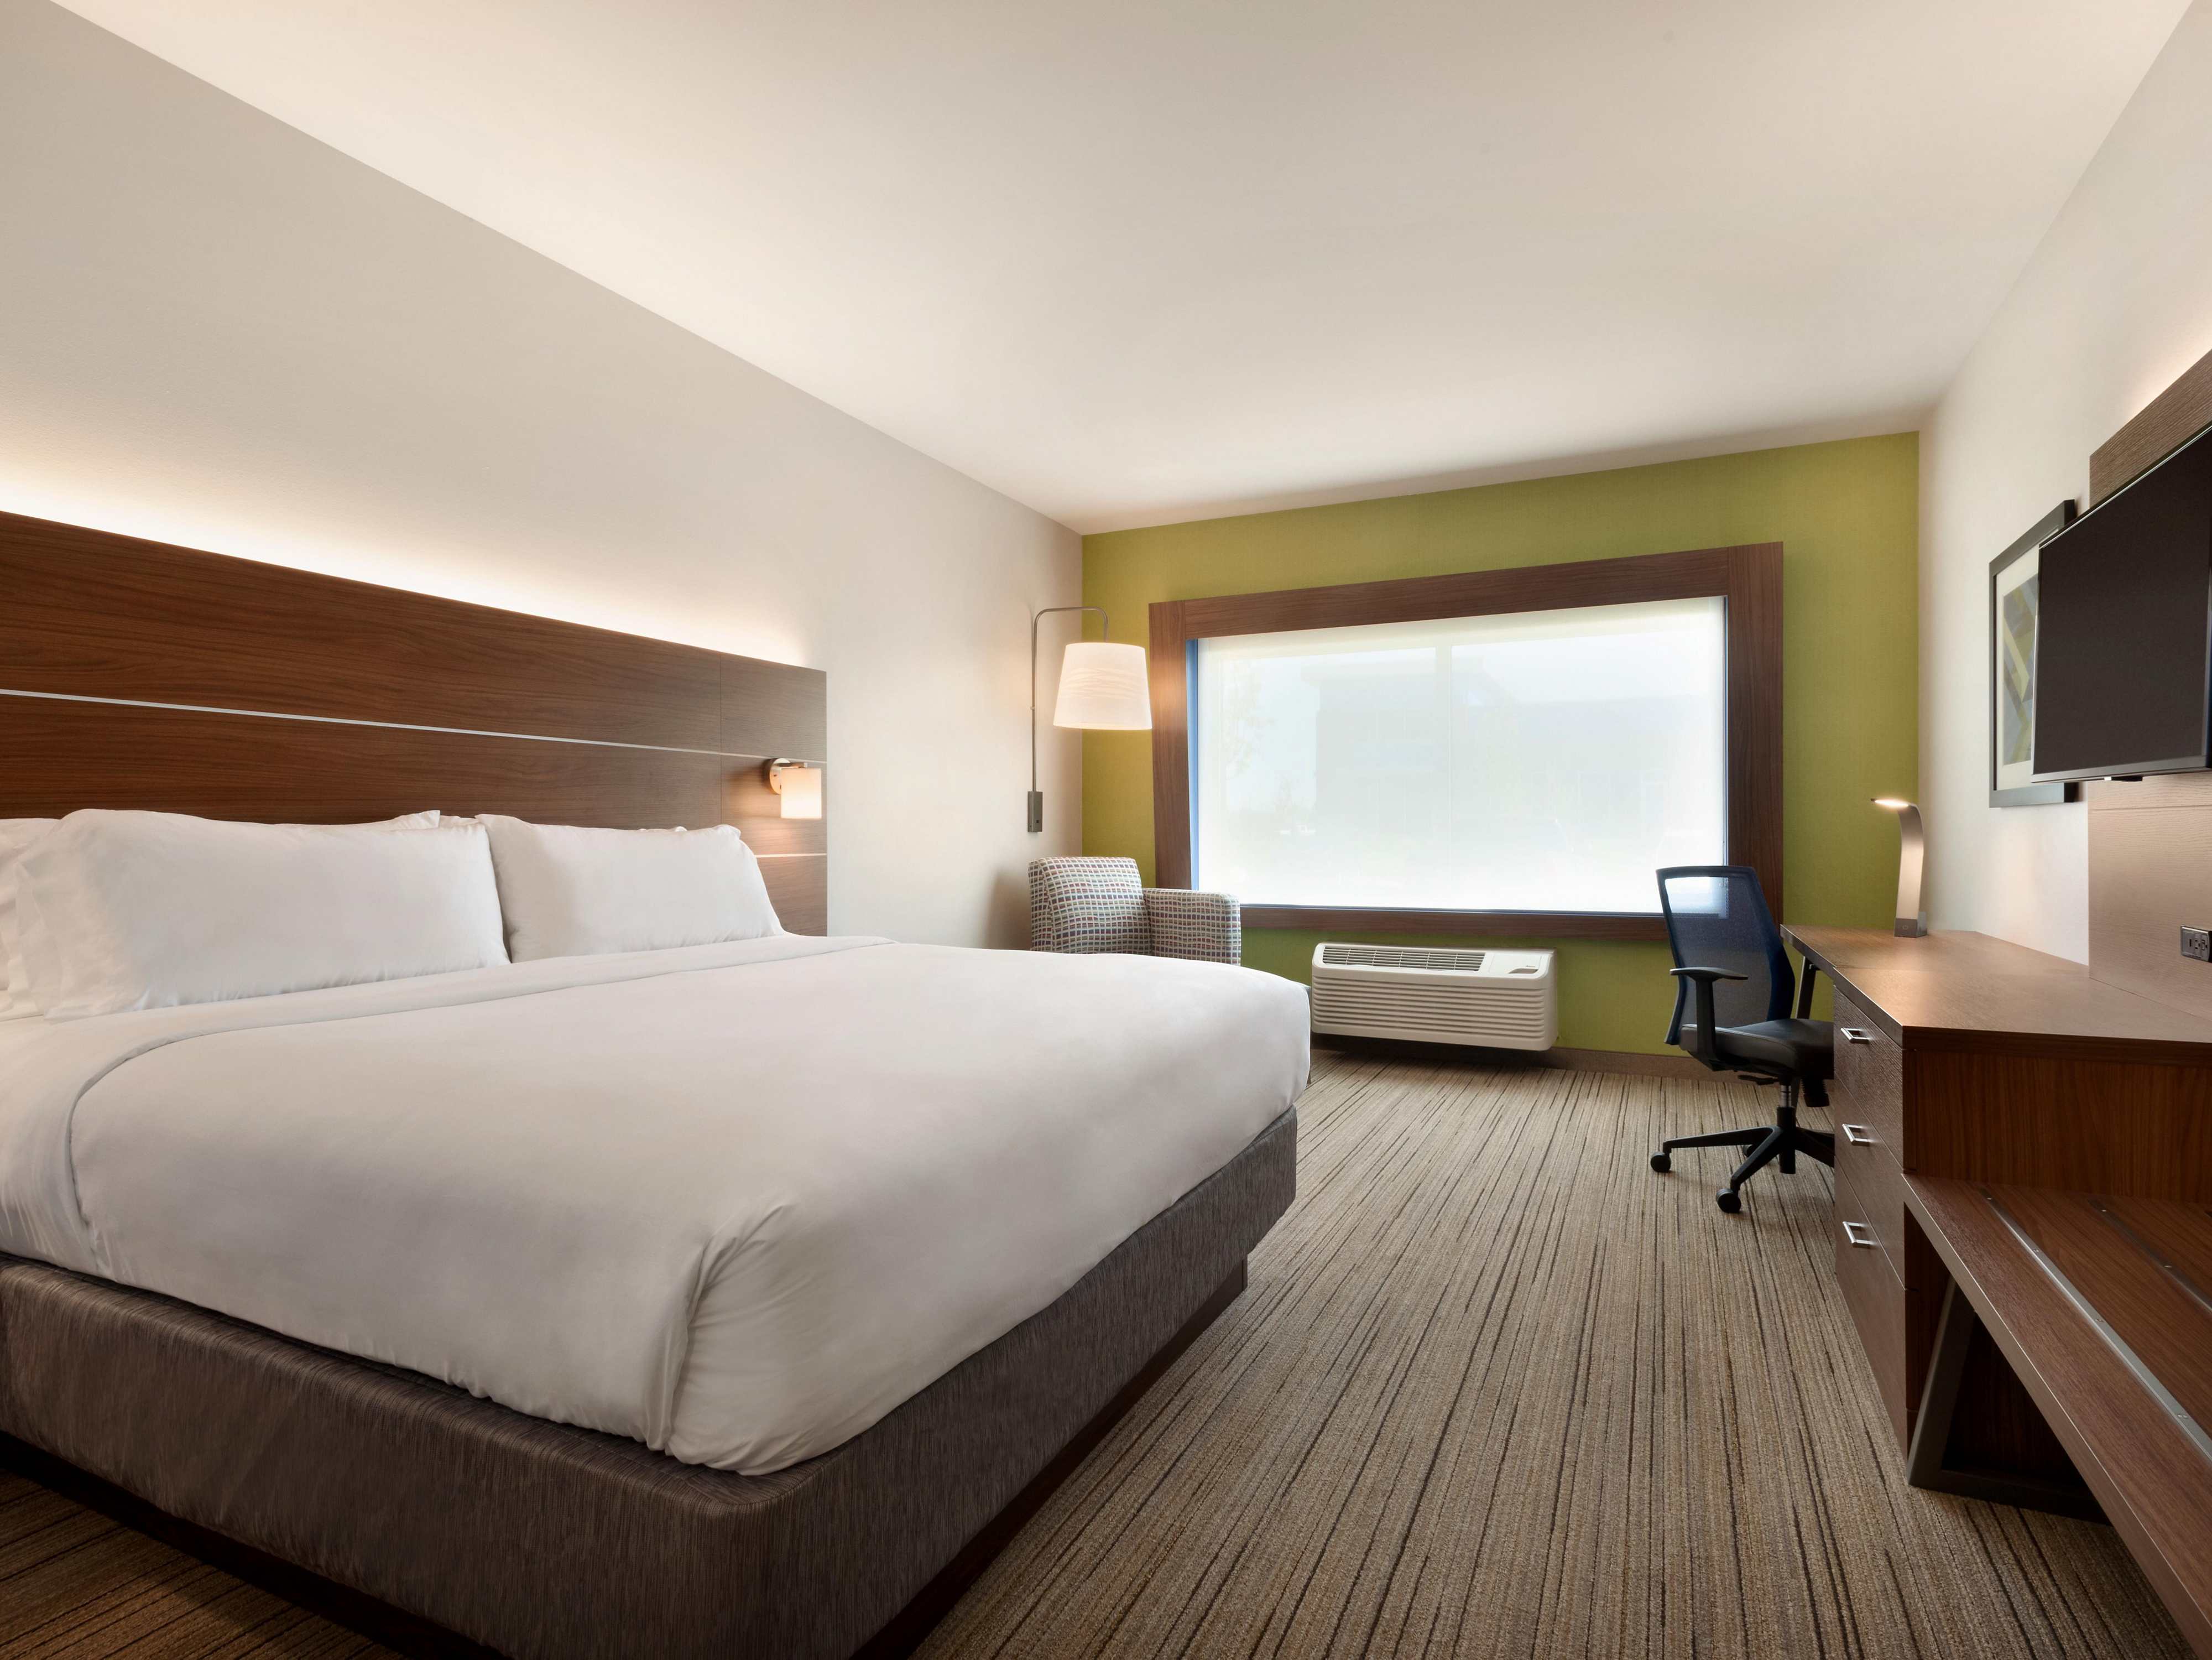 West Des Moines Hotels  Top 10 Hotels in West Des Moines, Iowa by IHG